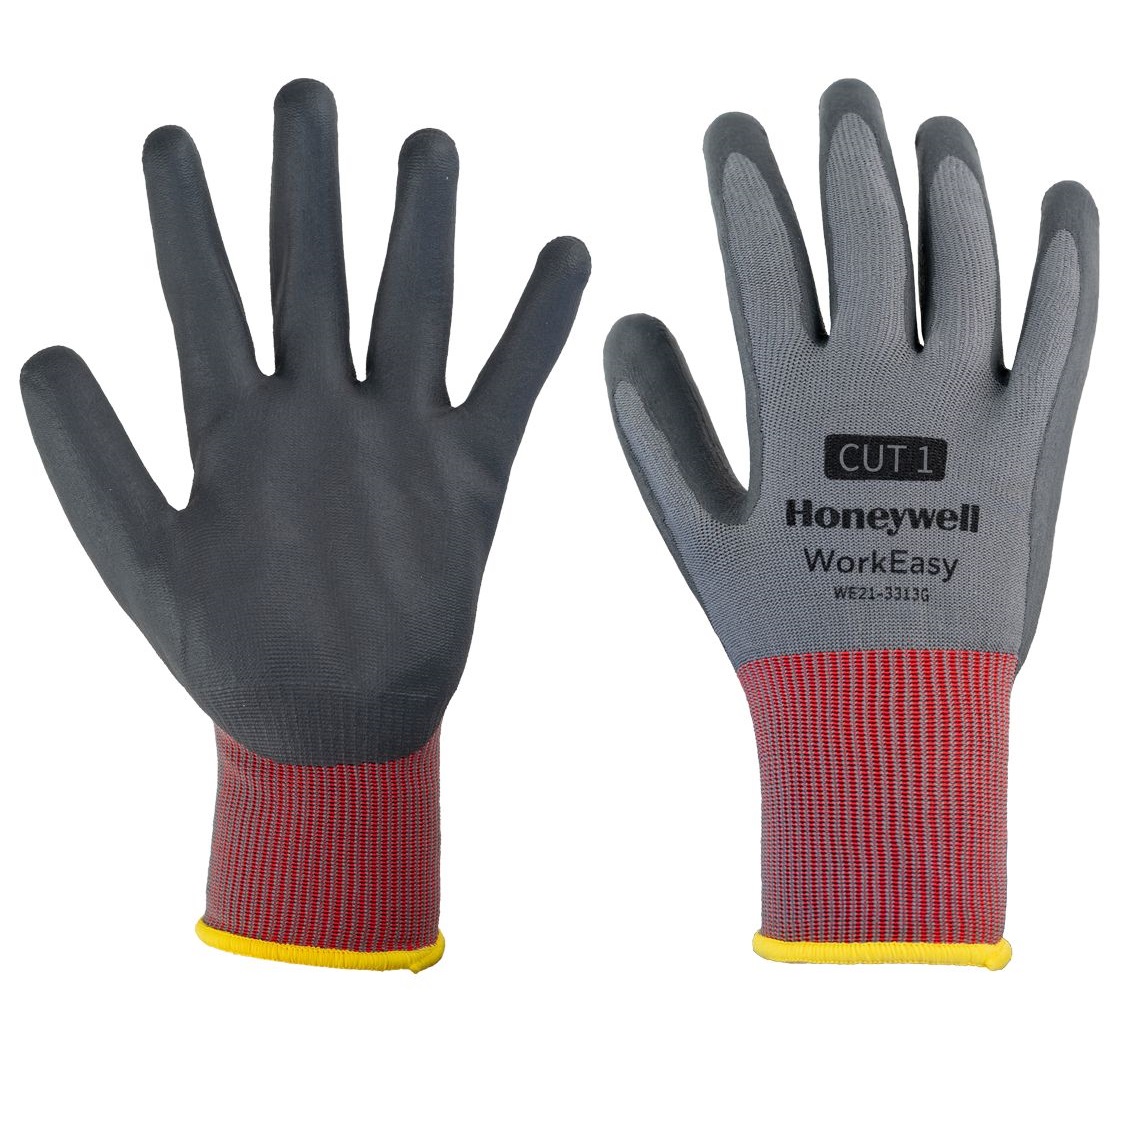 Manusi de protectie imersate partial pe suport tricot Honeywell WorkEasy nitril 3313G